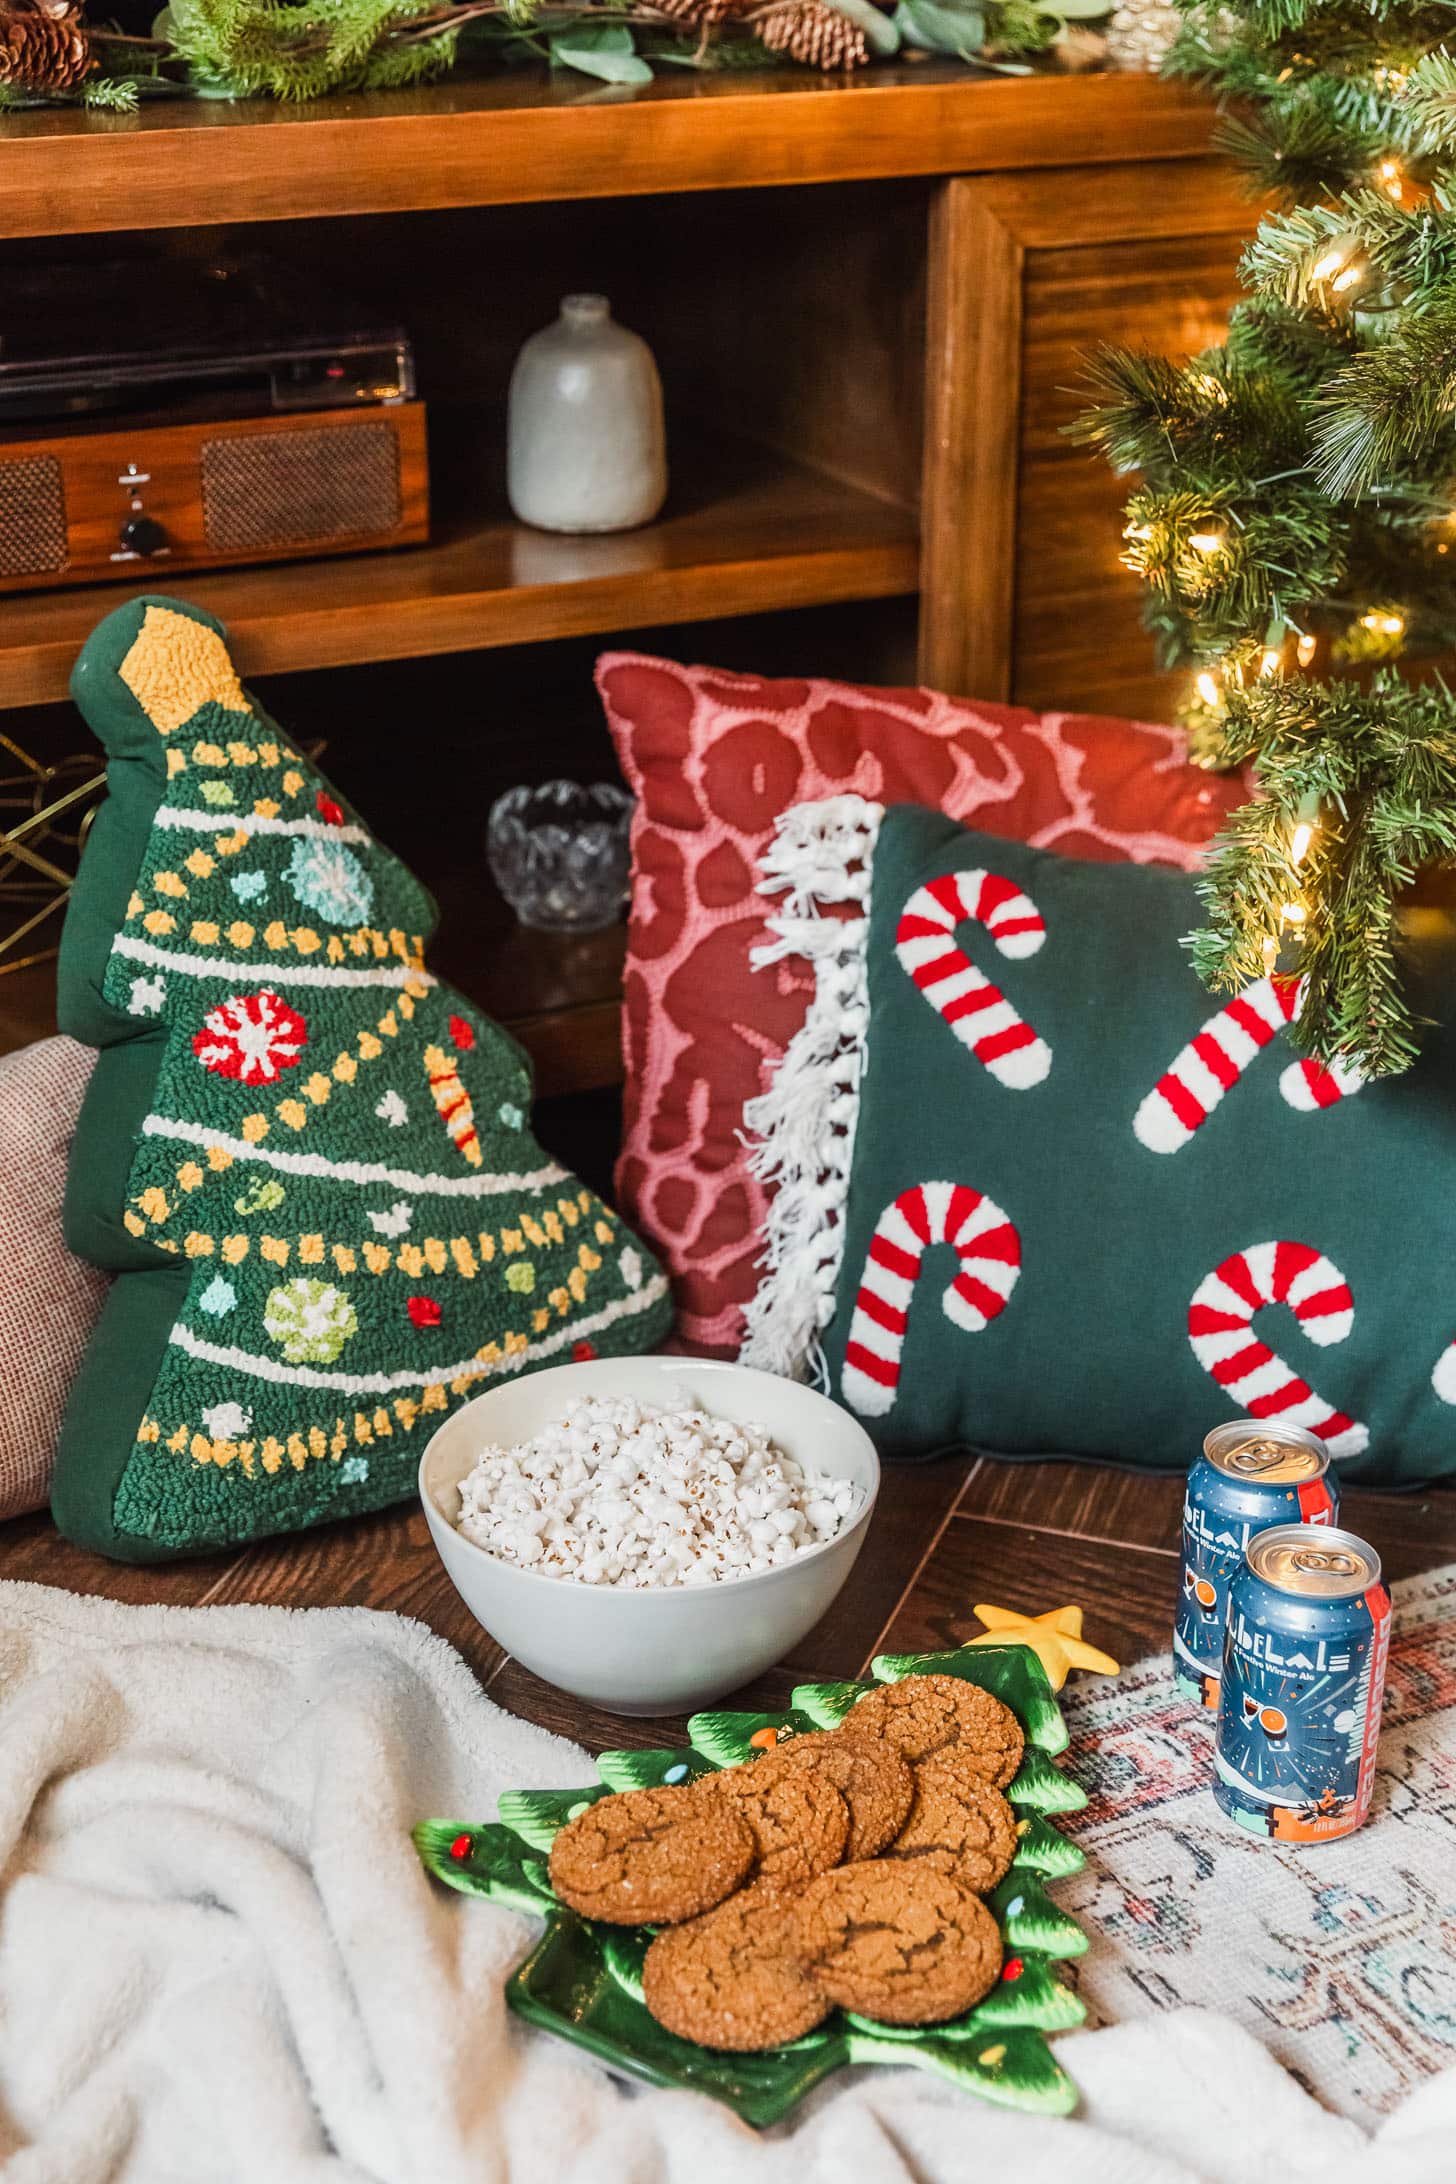 A Christmas tree plate with cookies on a white blanket next to a white bowl of popcorn, cans of beer, and Christmas pillows in front of a wood media console.